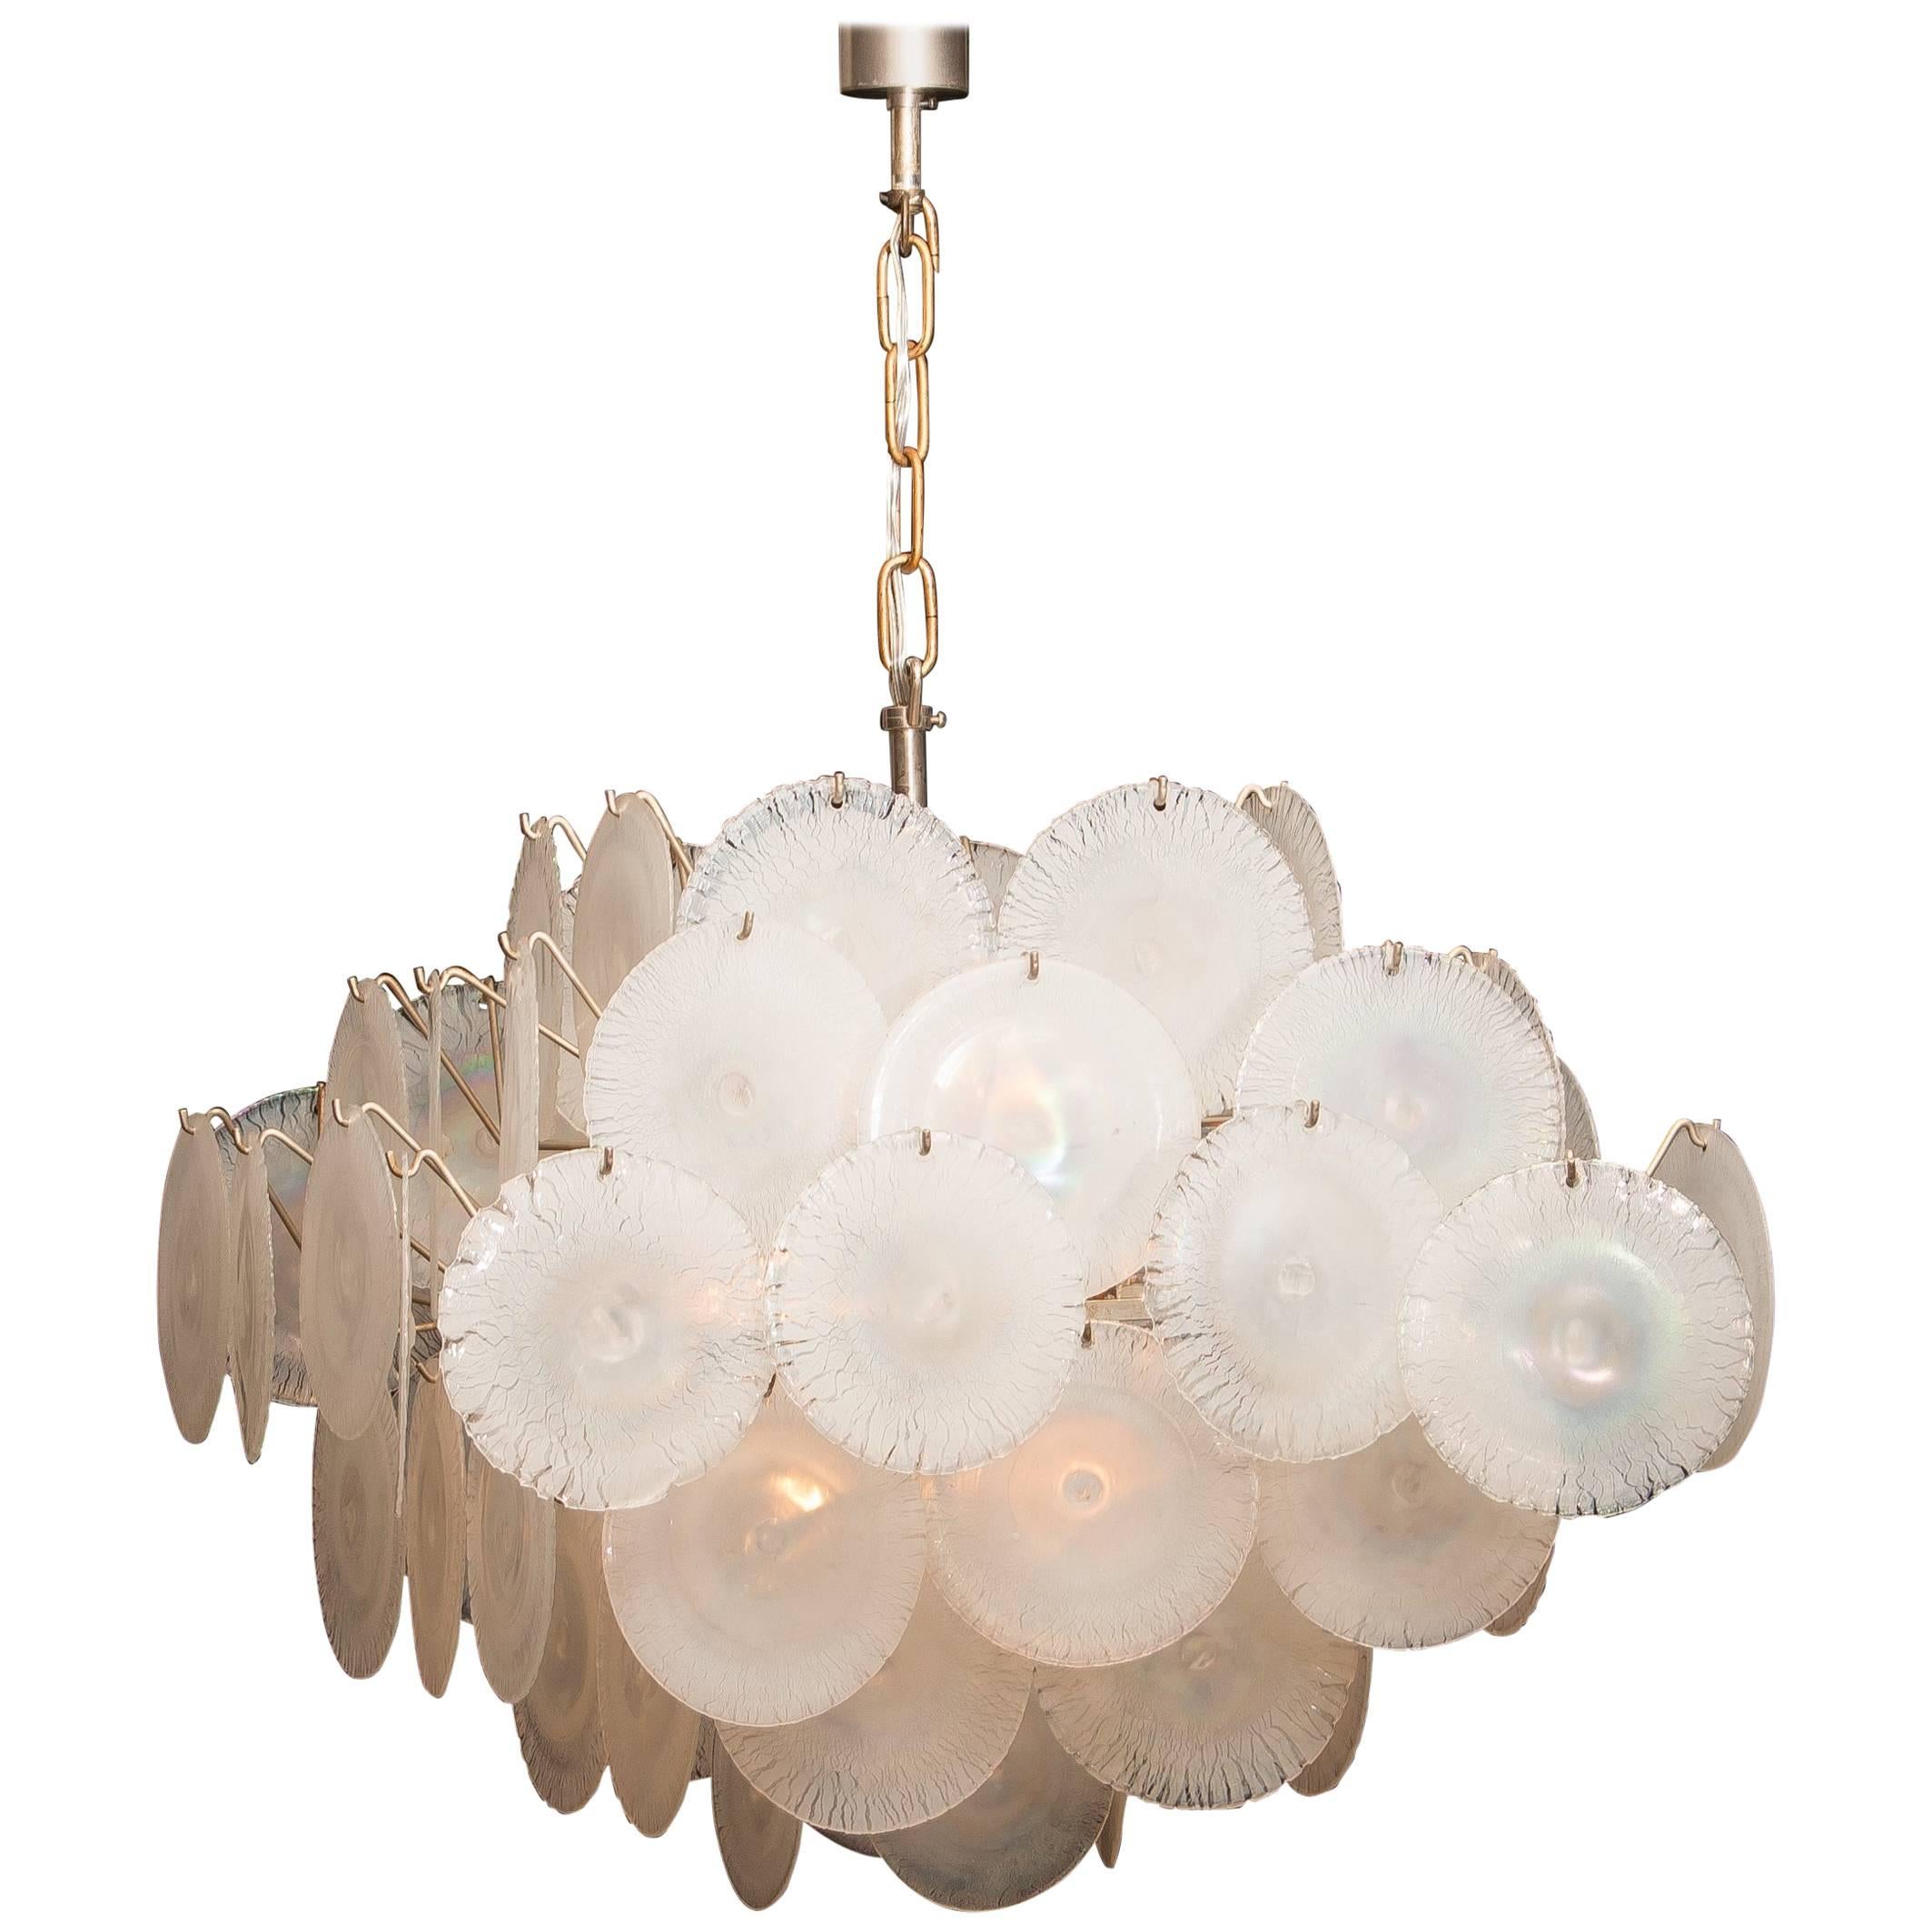 Gino Vistosi Chandelier with White / Pearl Murano Crystal Discs